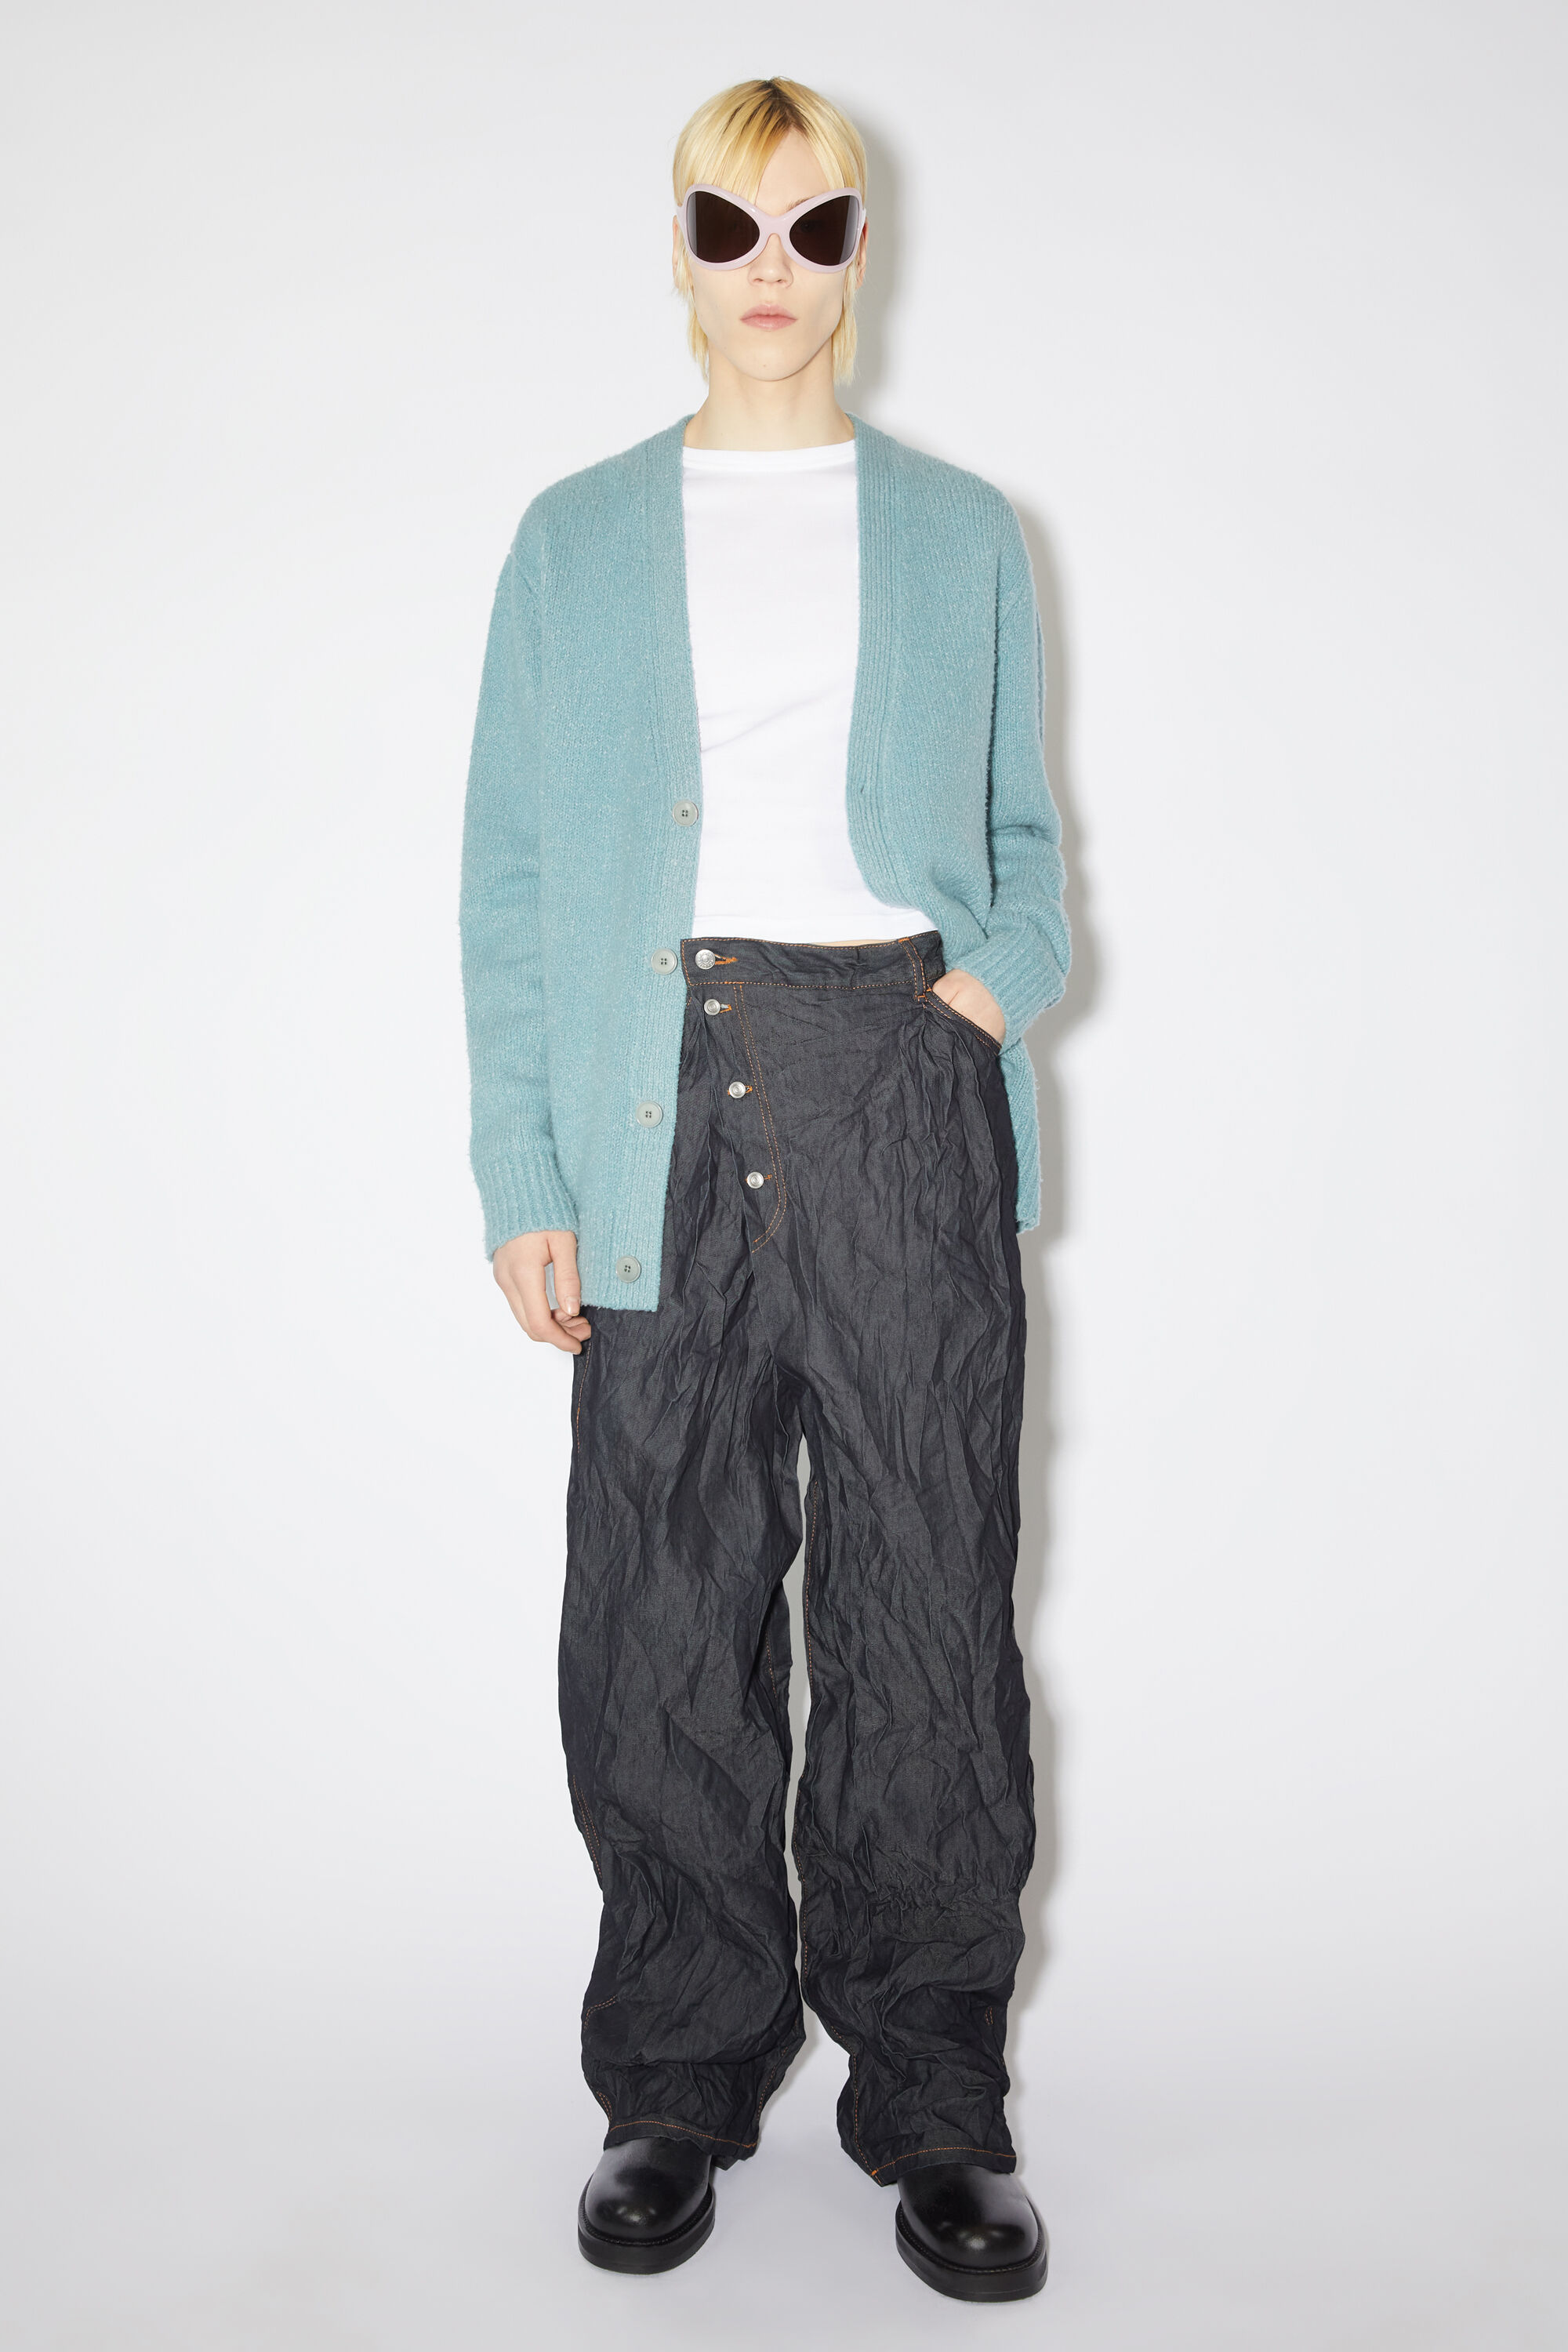 Acne Studios - Relaxed fit crinkled denim trousers - Indigo blue